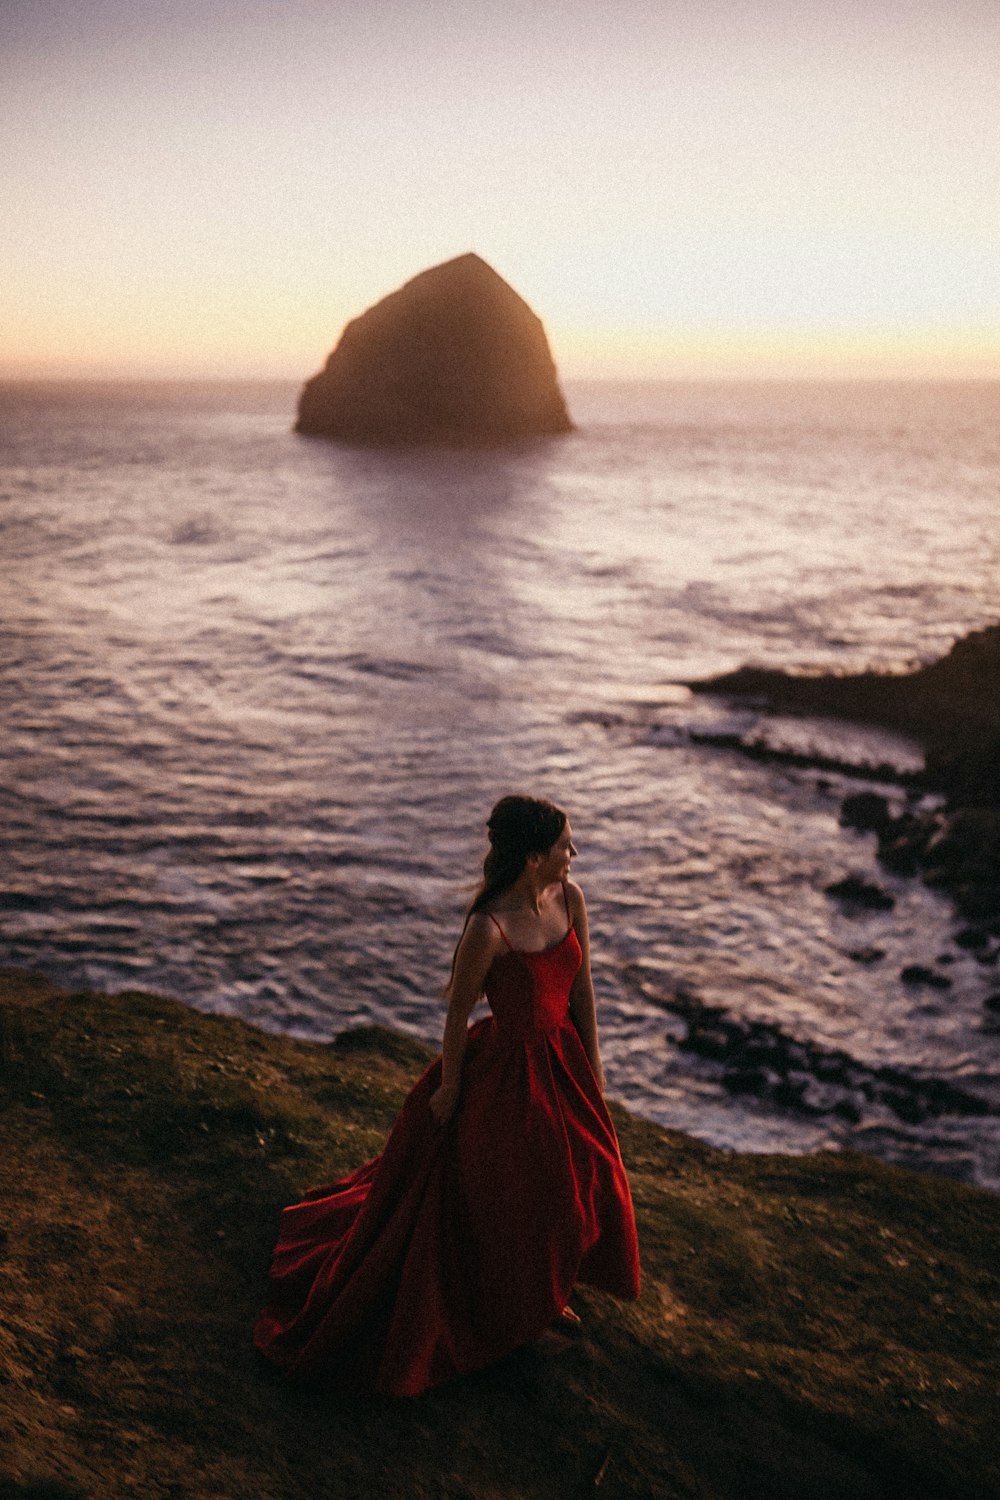 woman in red dress standing on rock near body of water during daytime